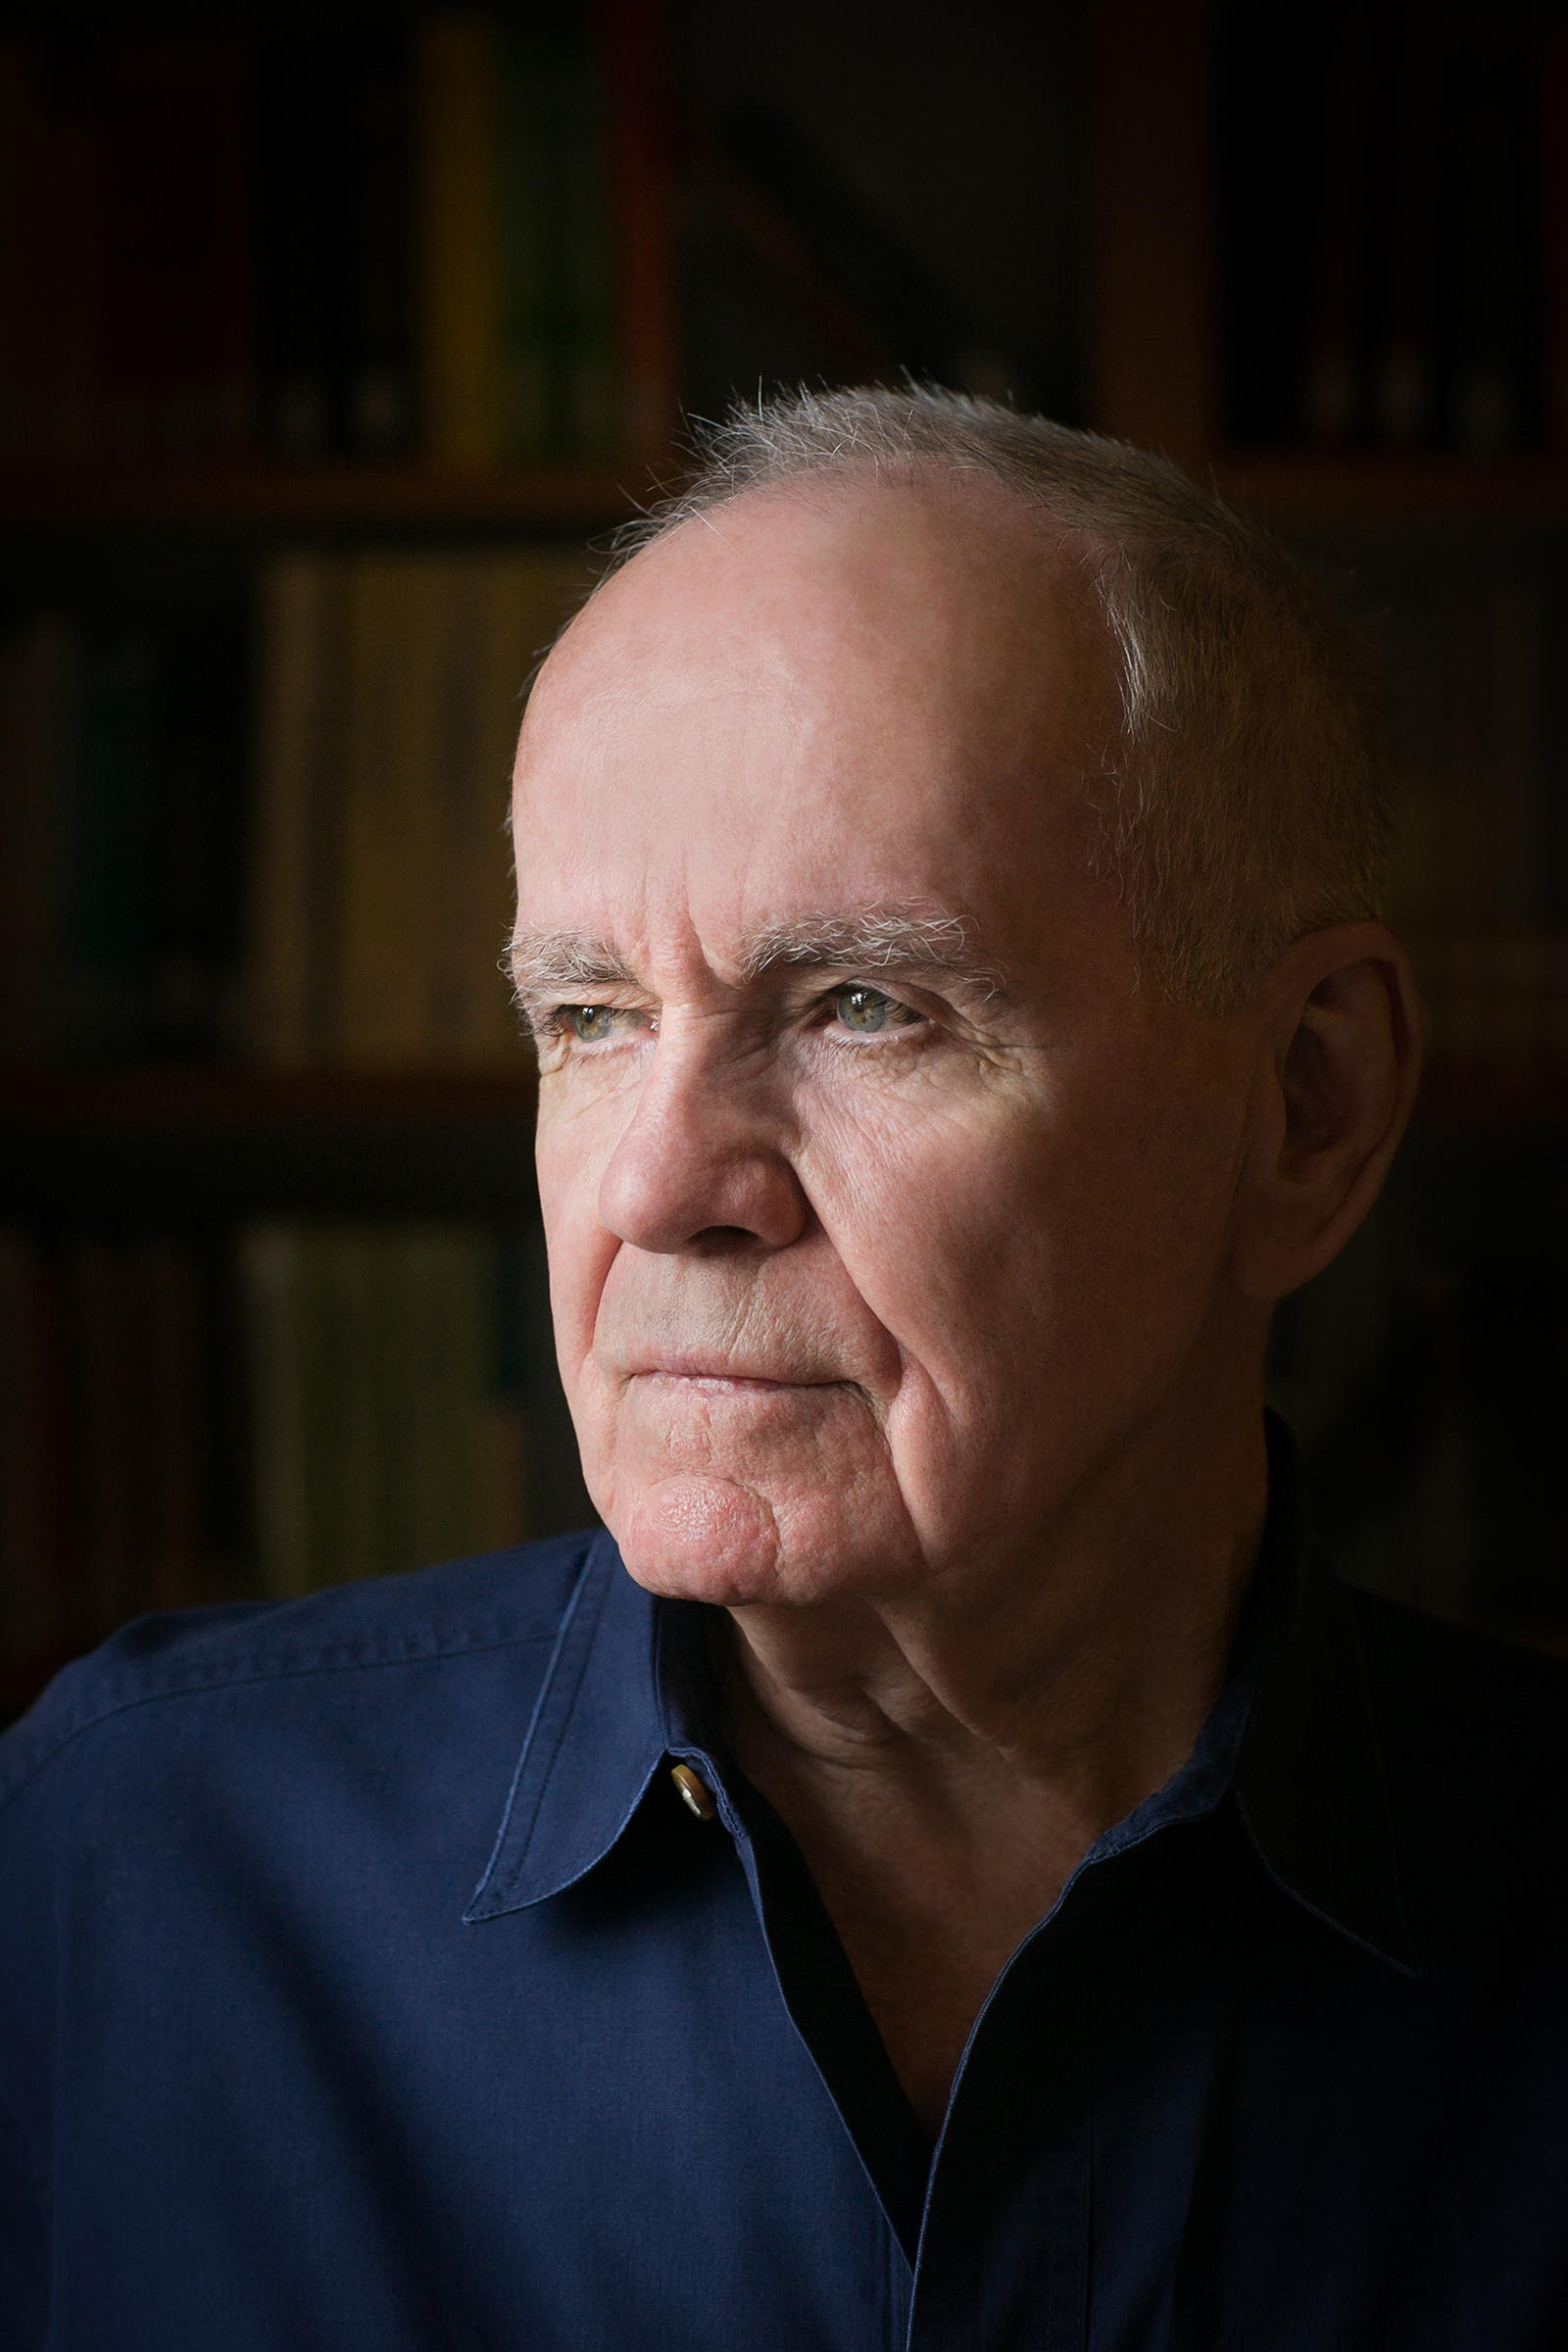 Cormac McCarthy, who has won both a Pulitzer Prize and a National Book Award, is set to publish his first works of fiction in 16 years. (Beowulf Sheehan)